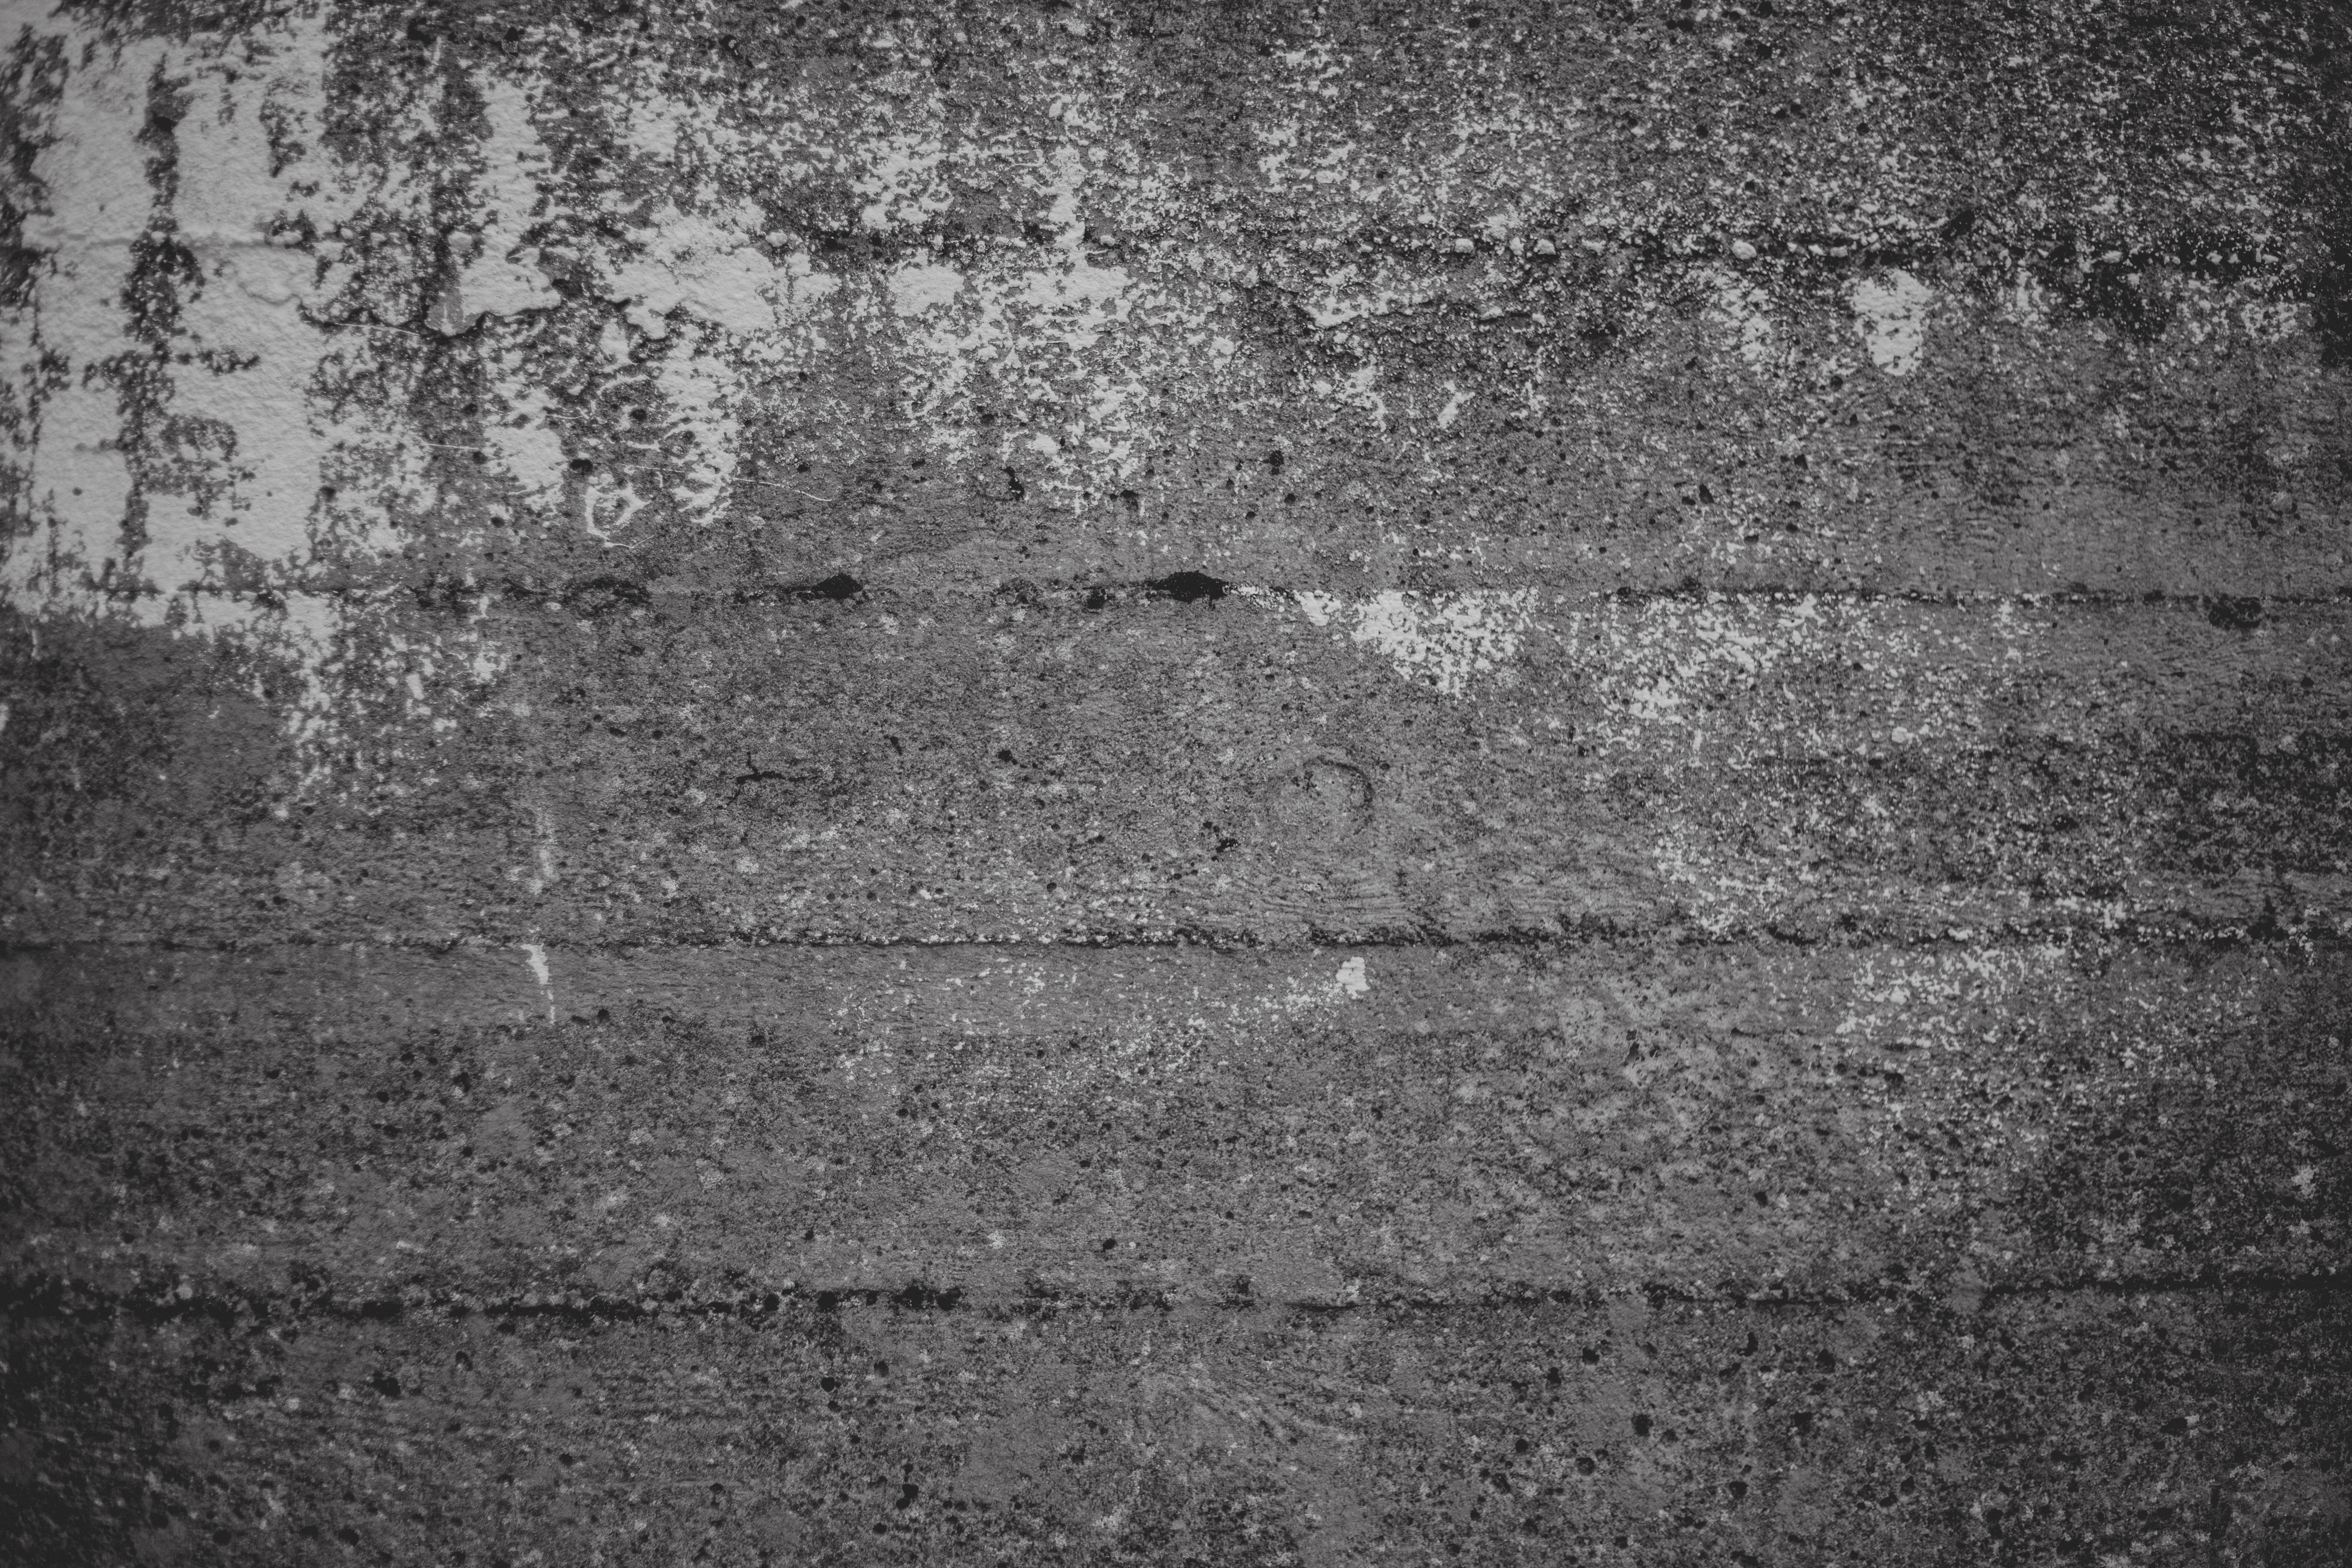 Black and White Grunge Wall Texture, Concrete, Damaged, Details, Grunge, HQ Photo